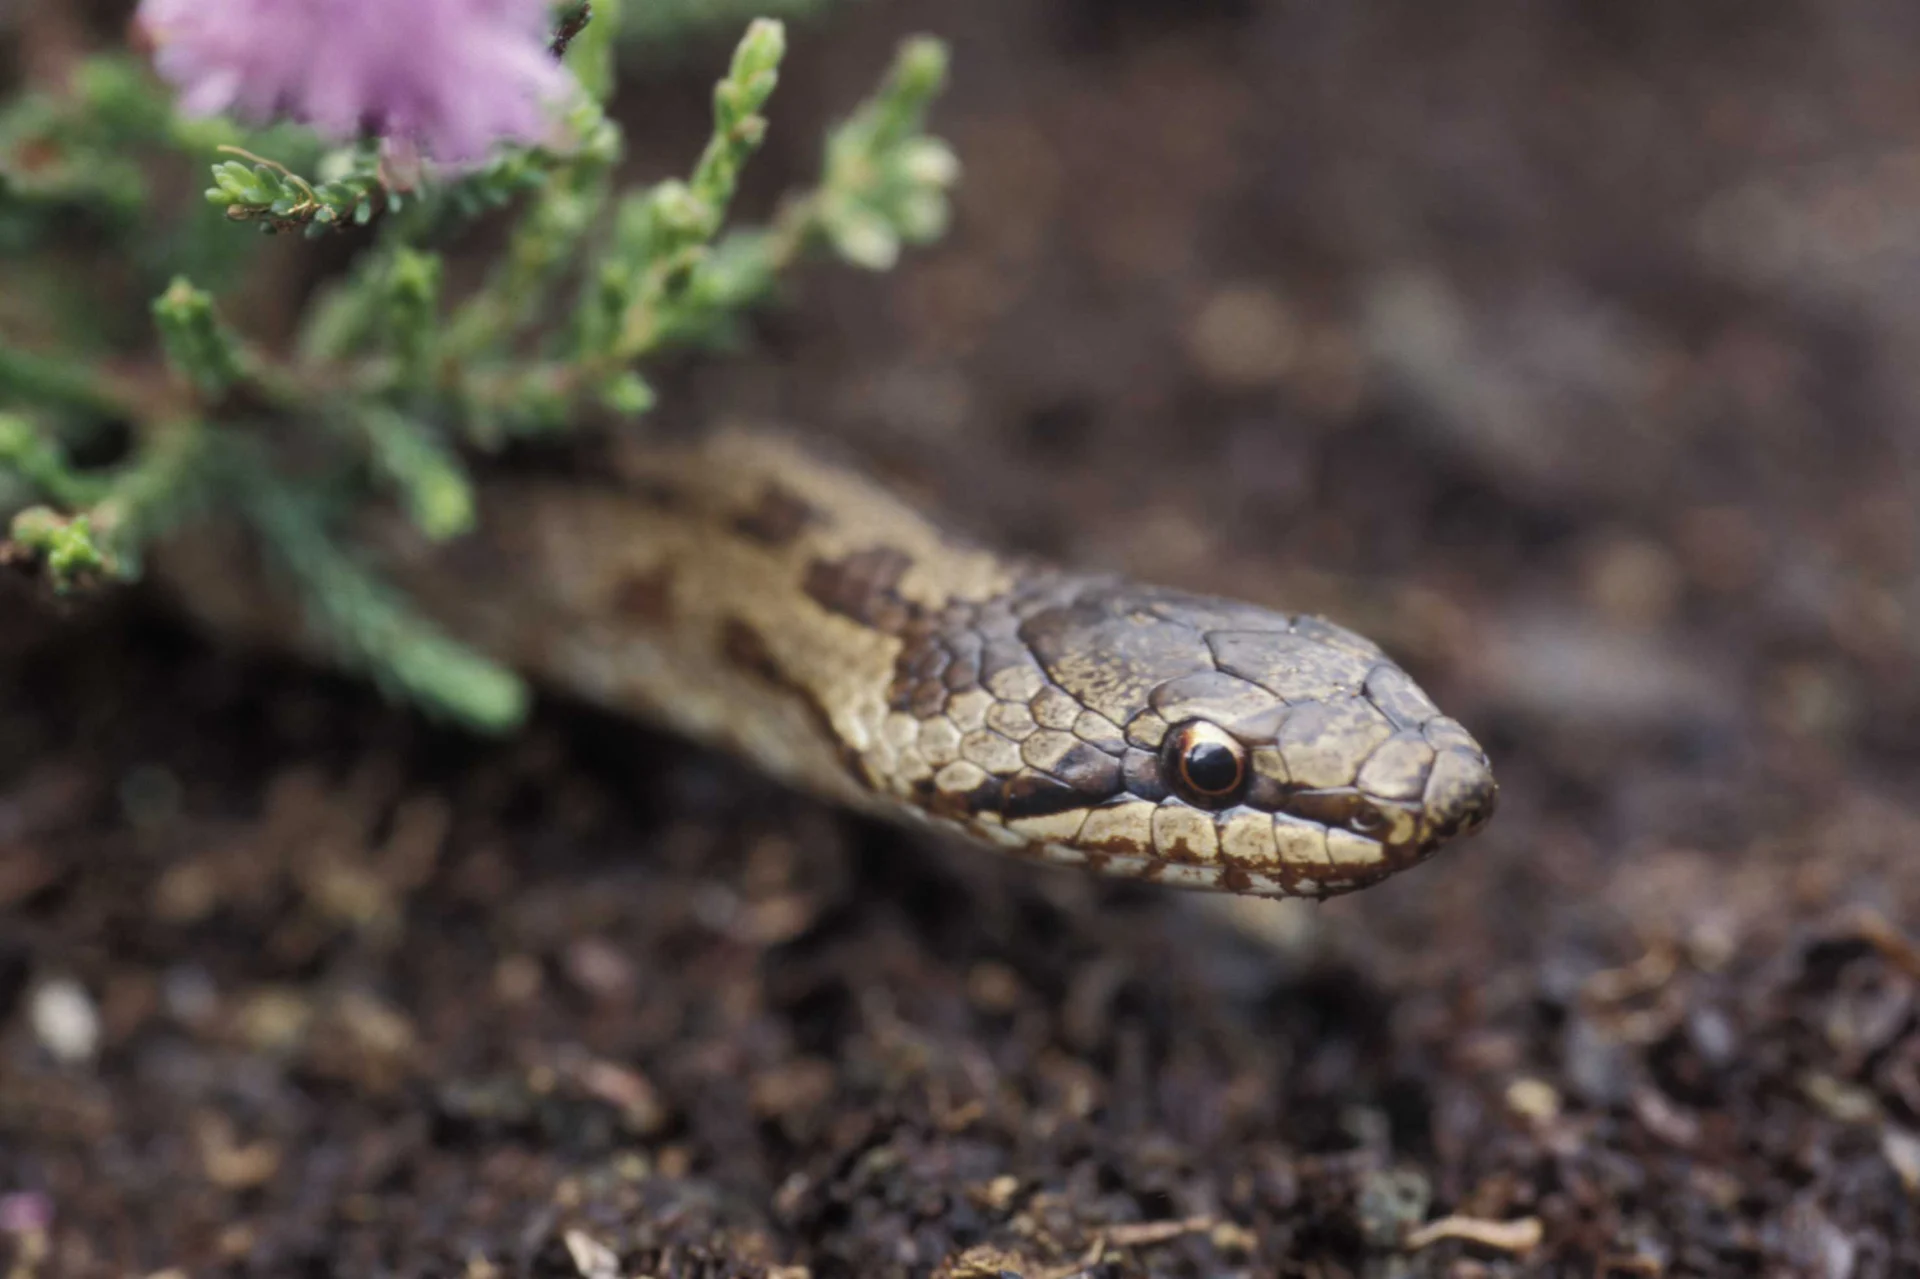 Head of a smooth snake looks out from under a plant